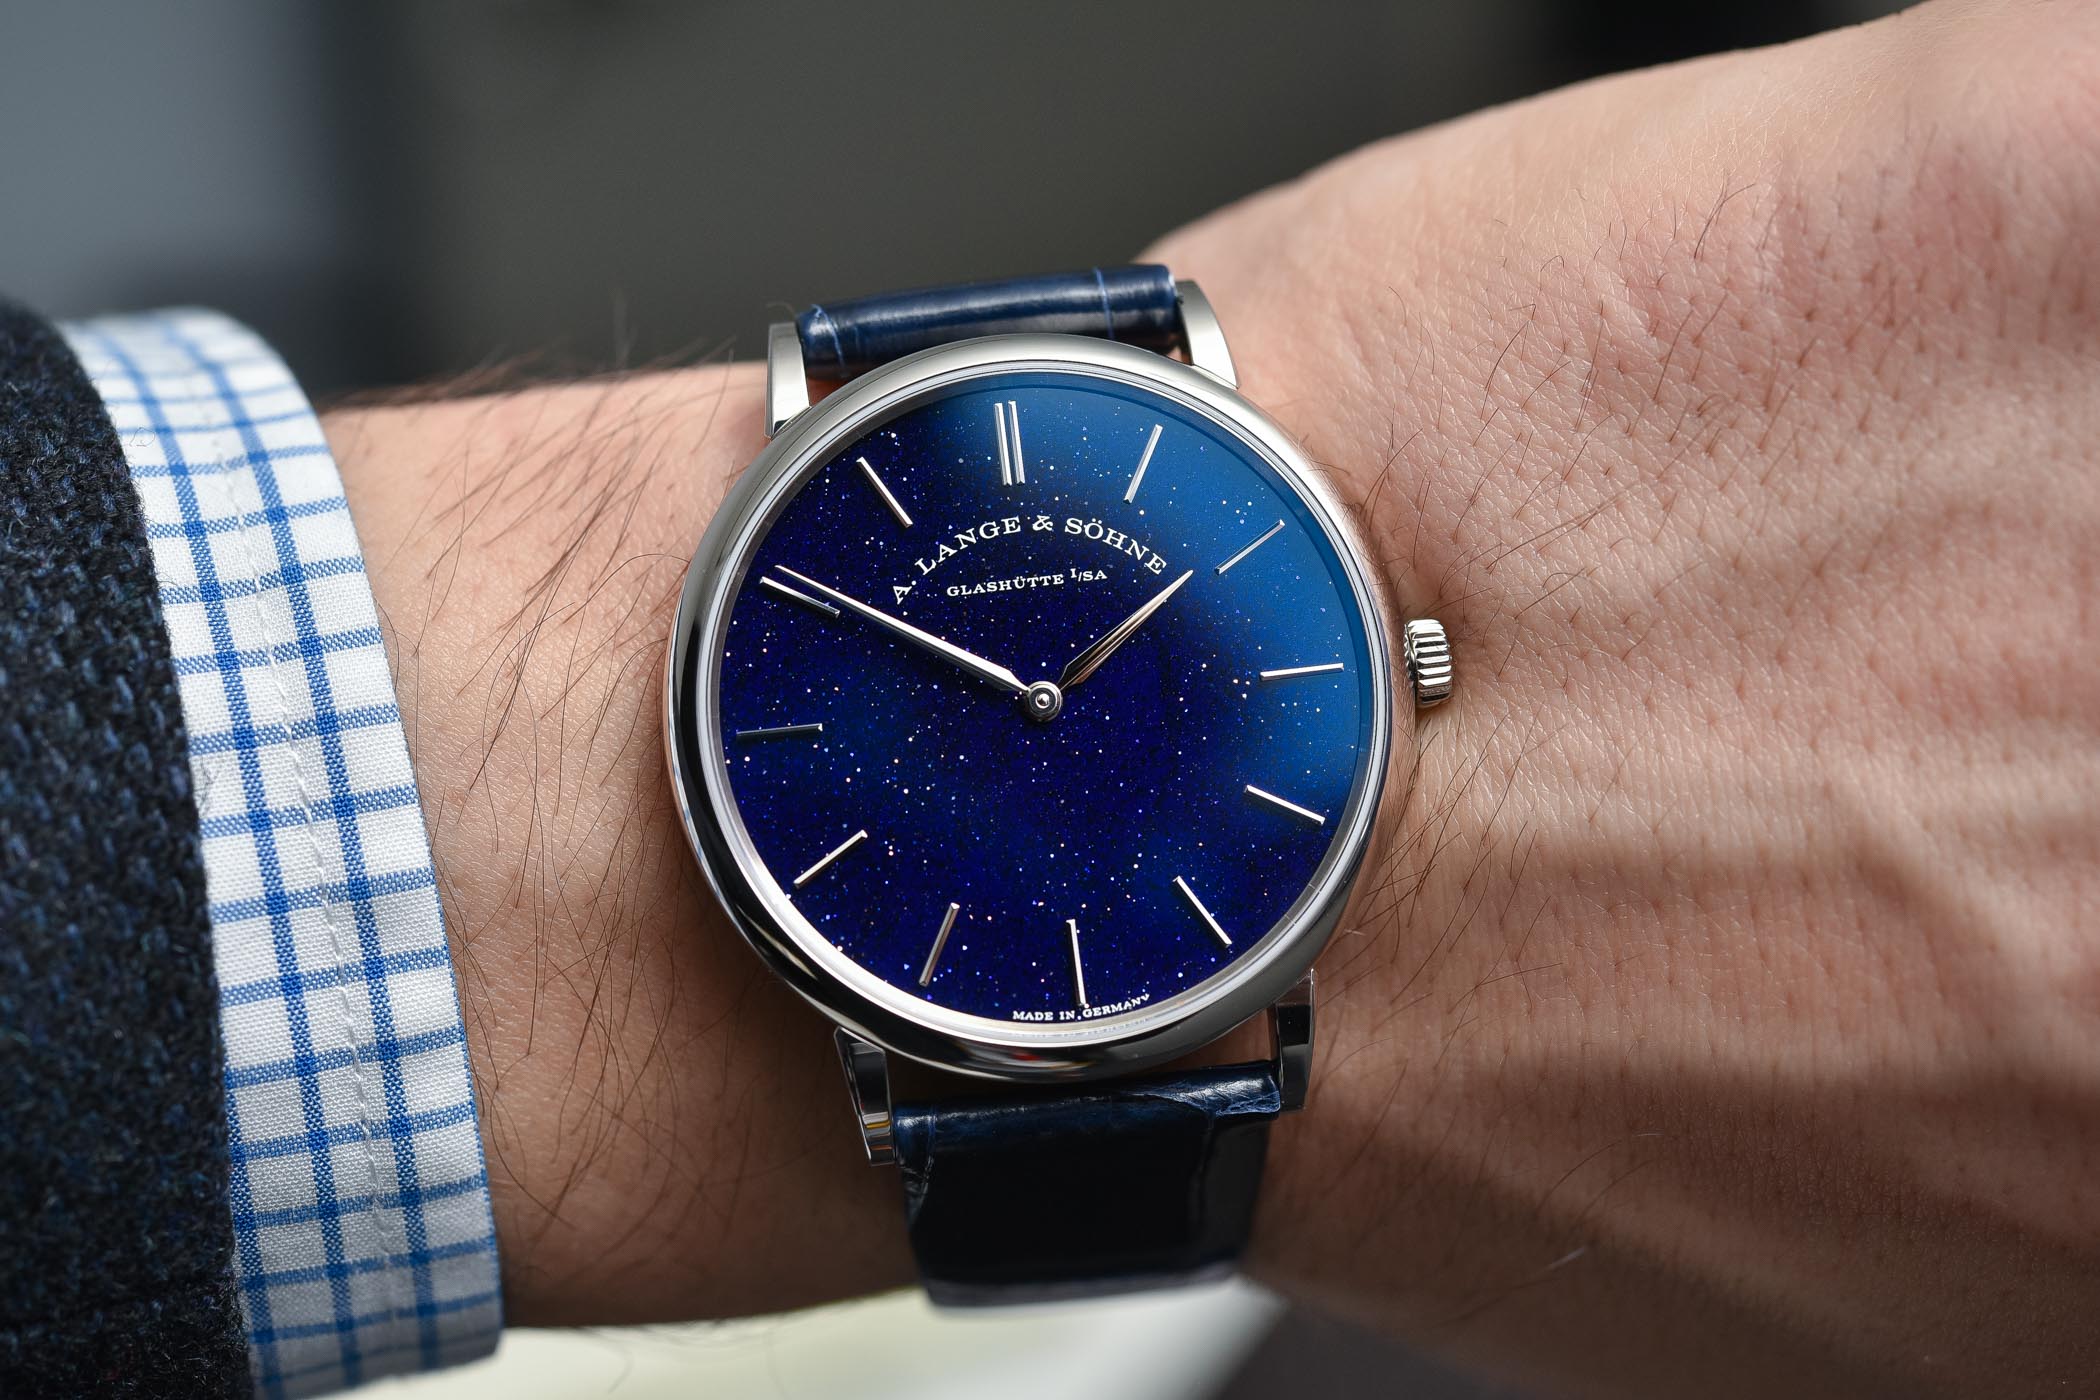 The blue dial copy watch has blue strap.